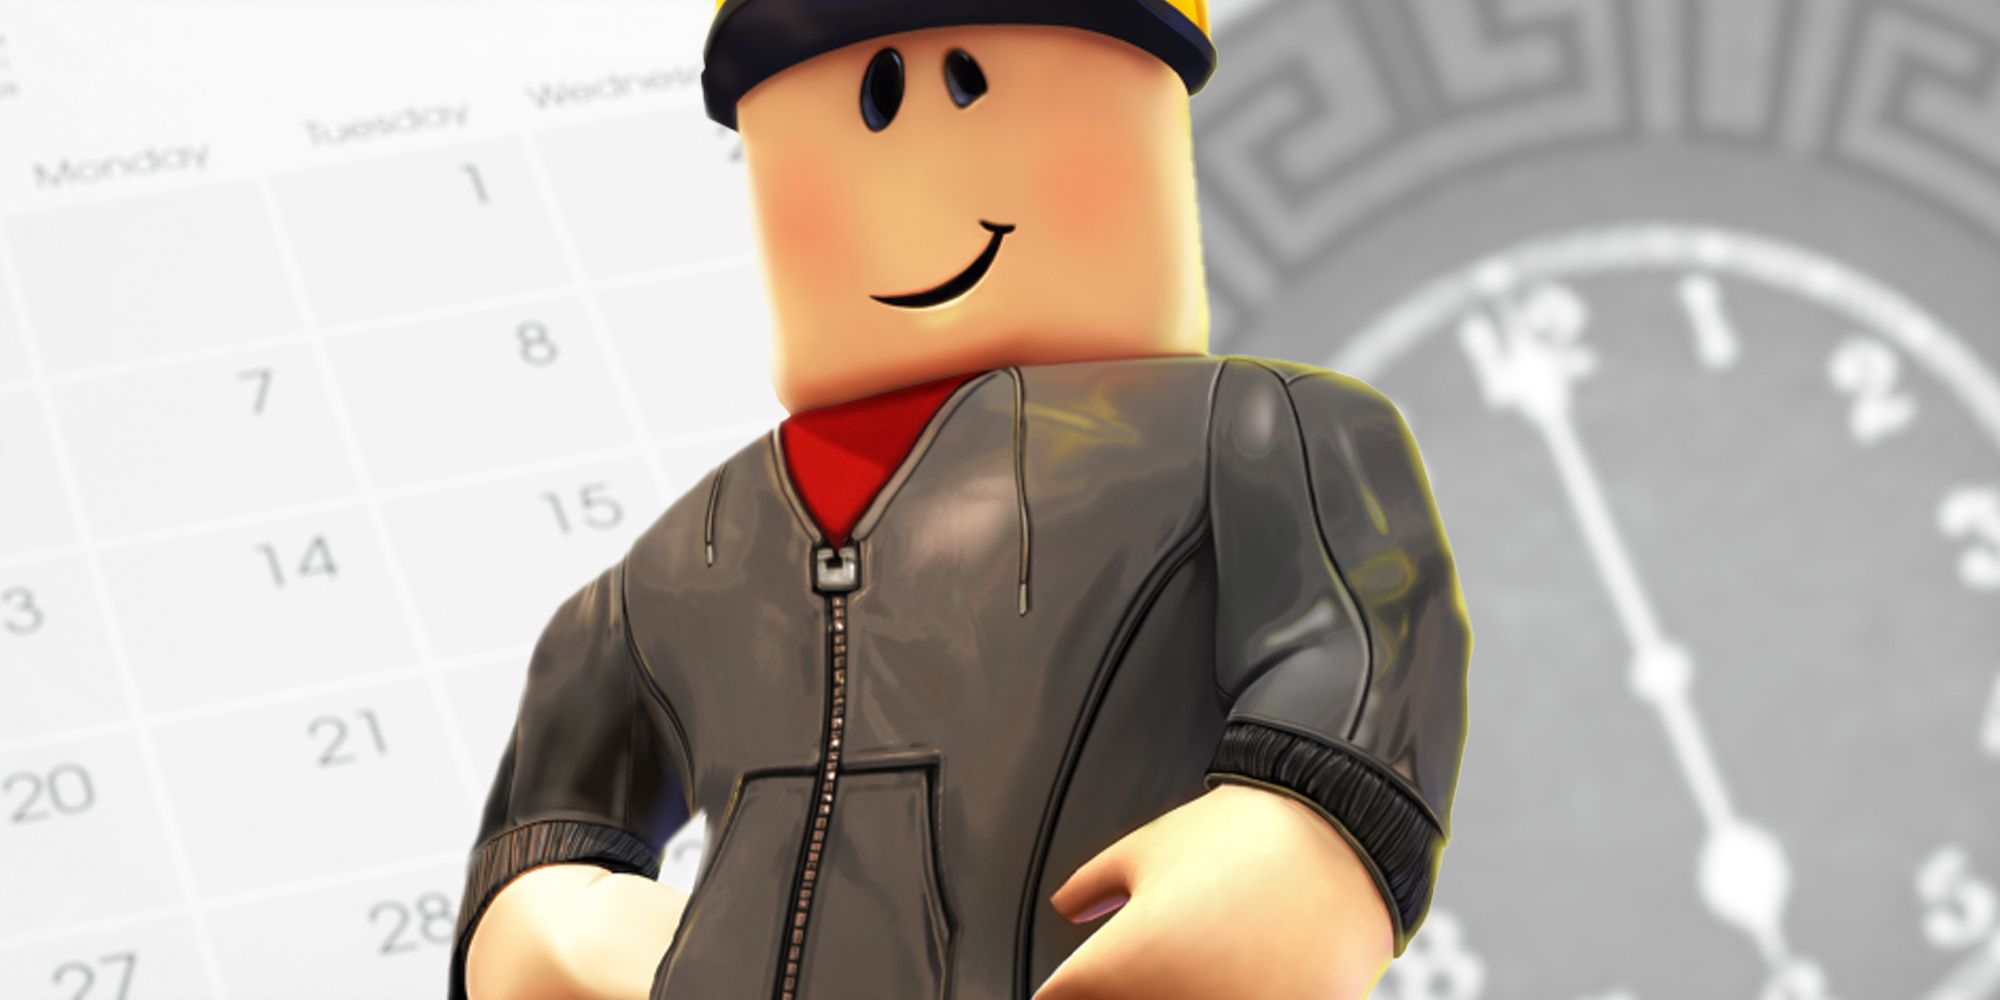 I Played Roblox For An Entire Year: Here's What I Learned